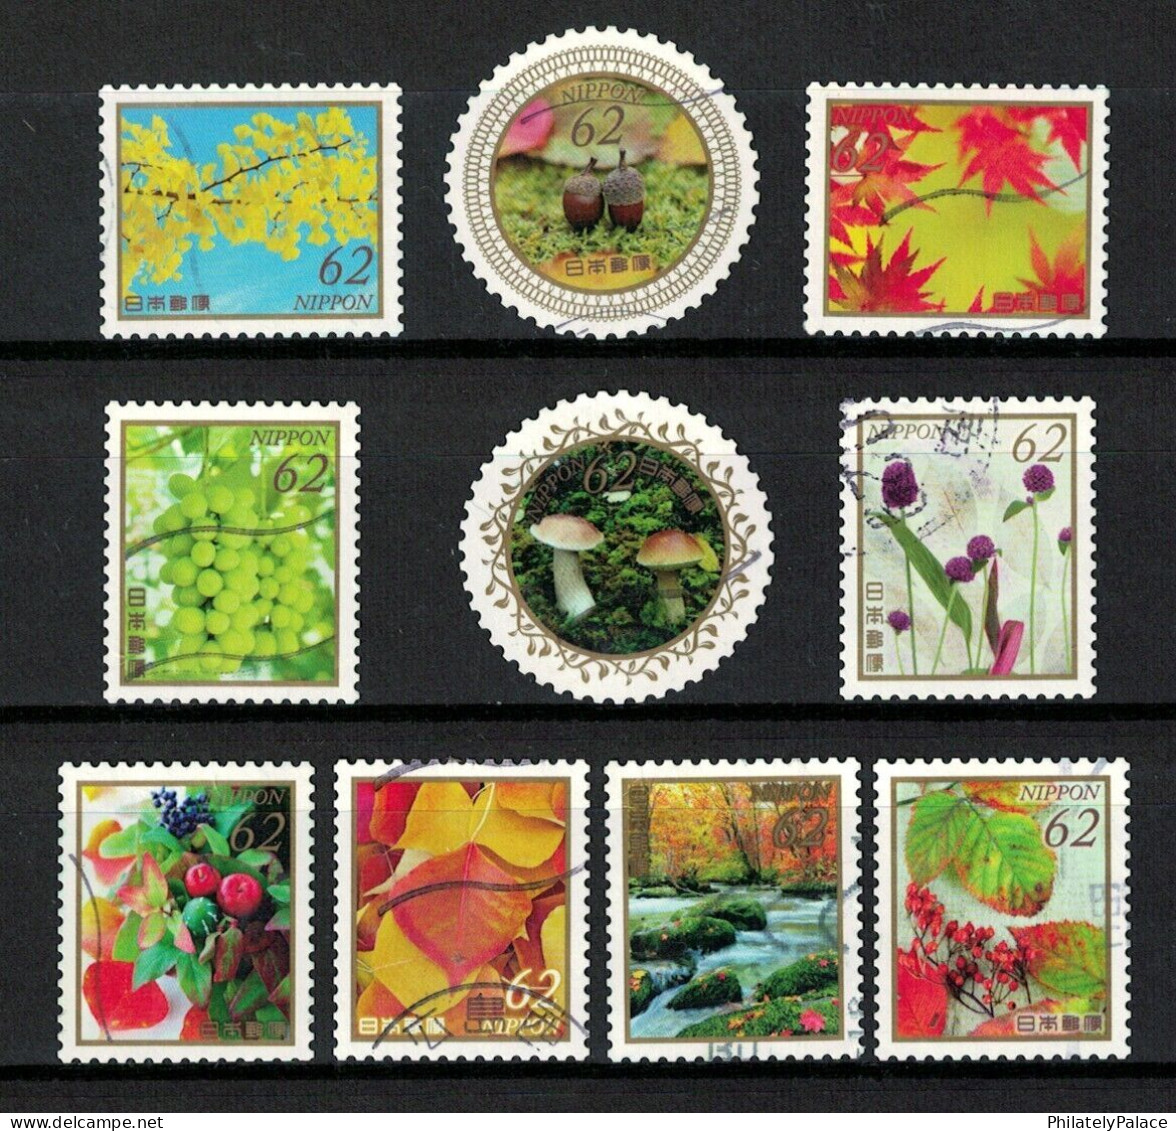 JAPAN 2018 AUTUMN GREETINGS FLOWERS & FRUITS , MUSHROOM, 62 YEN COMP. SET OF 10 STAMPS USED (**) - Used Stamps